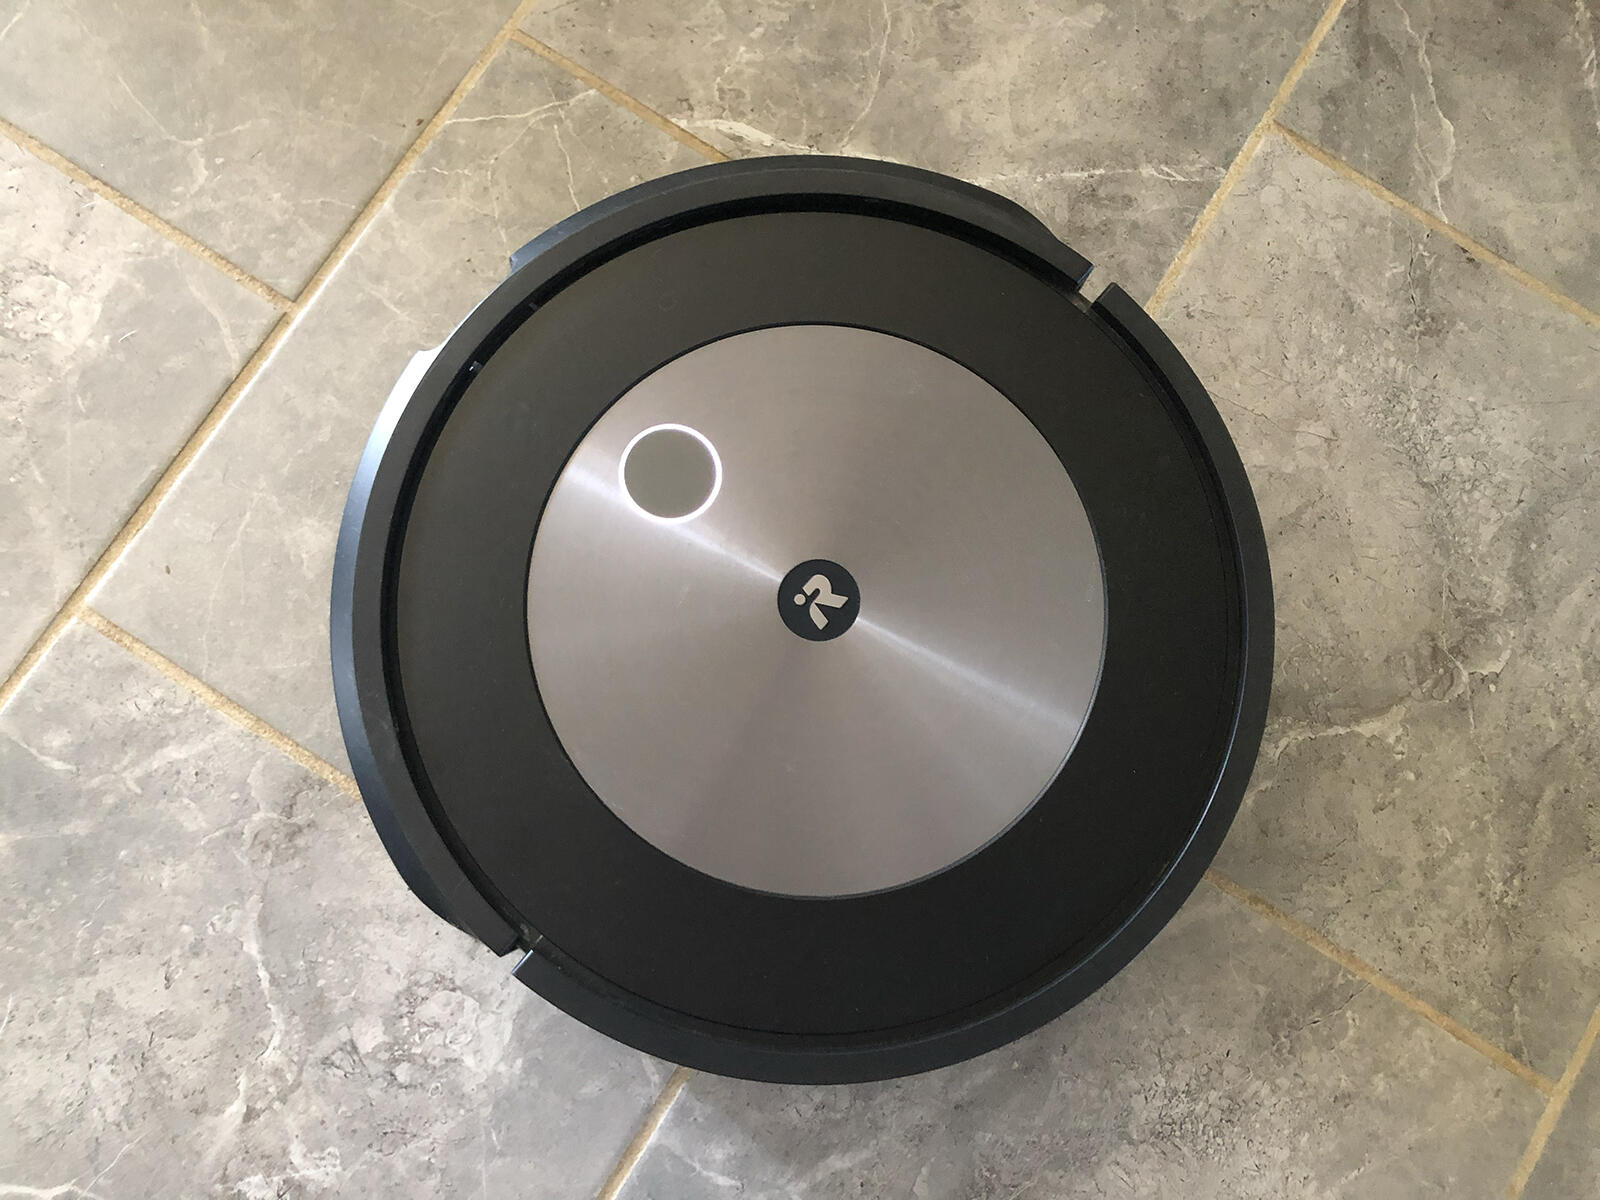 My review of the iRobot Roomba j7+